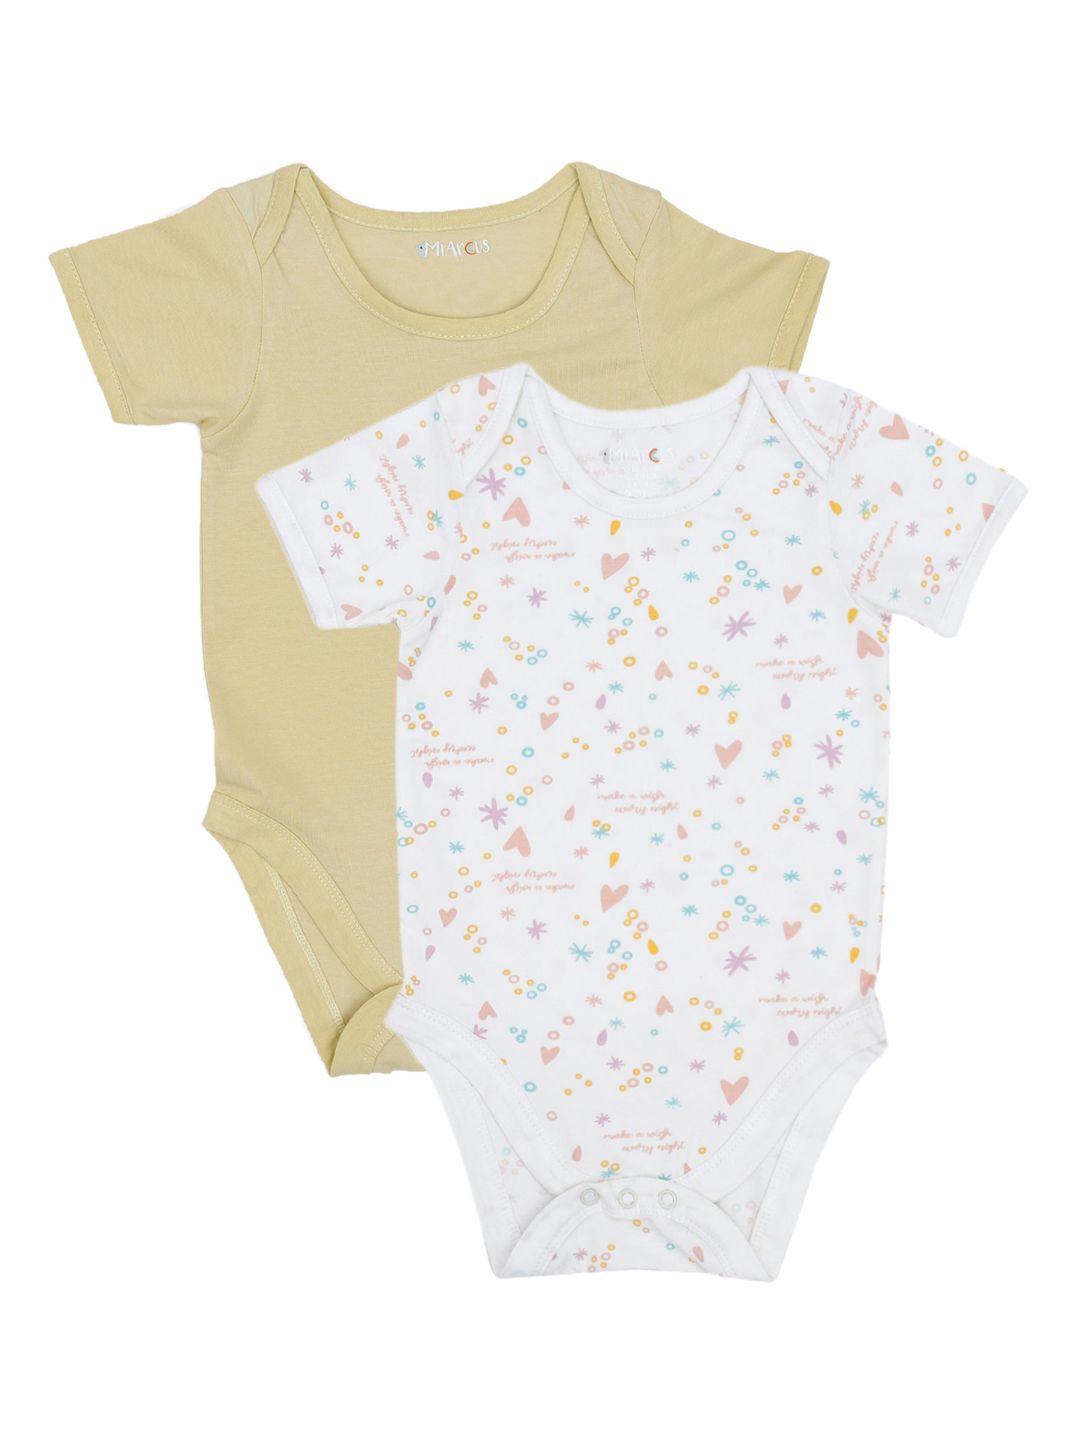 miarcus-kids-off-white-&-beige-pack-of-2-rompers